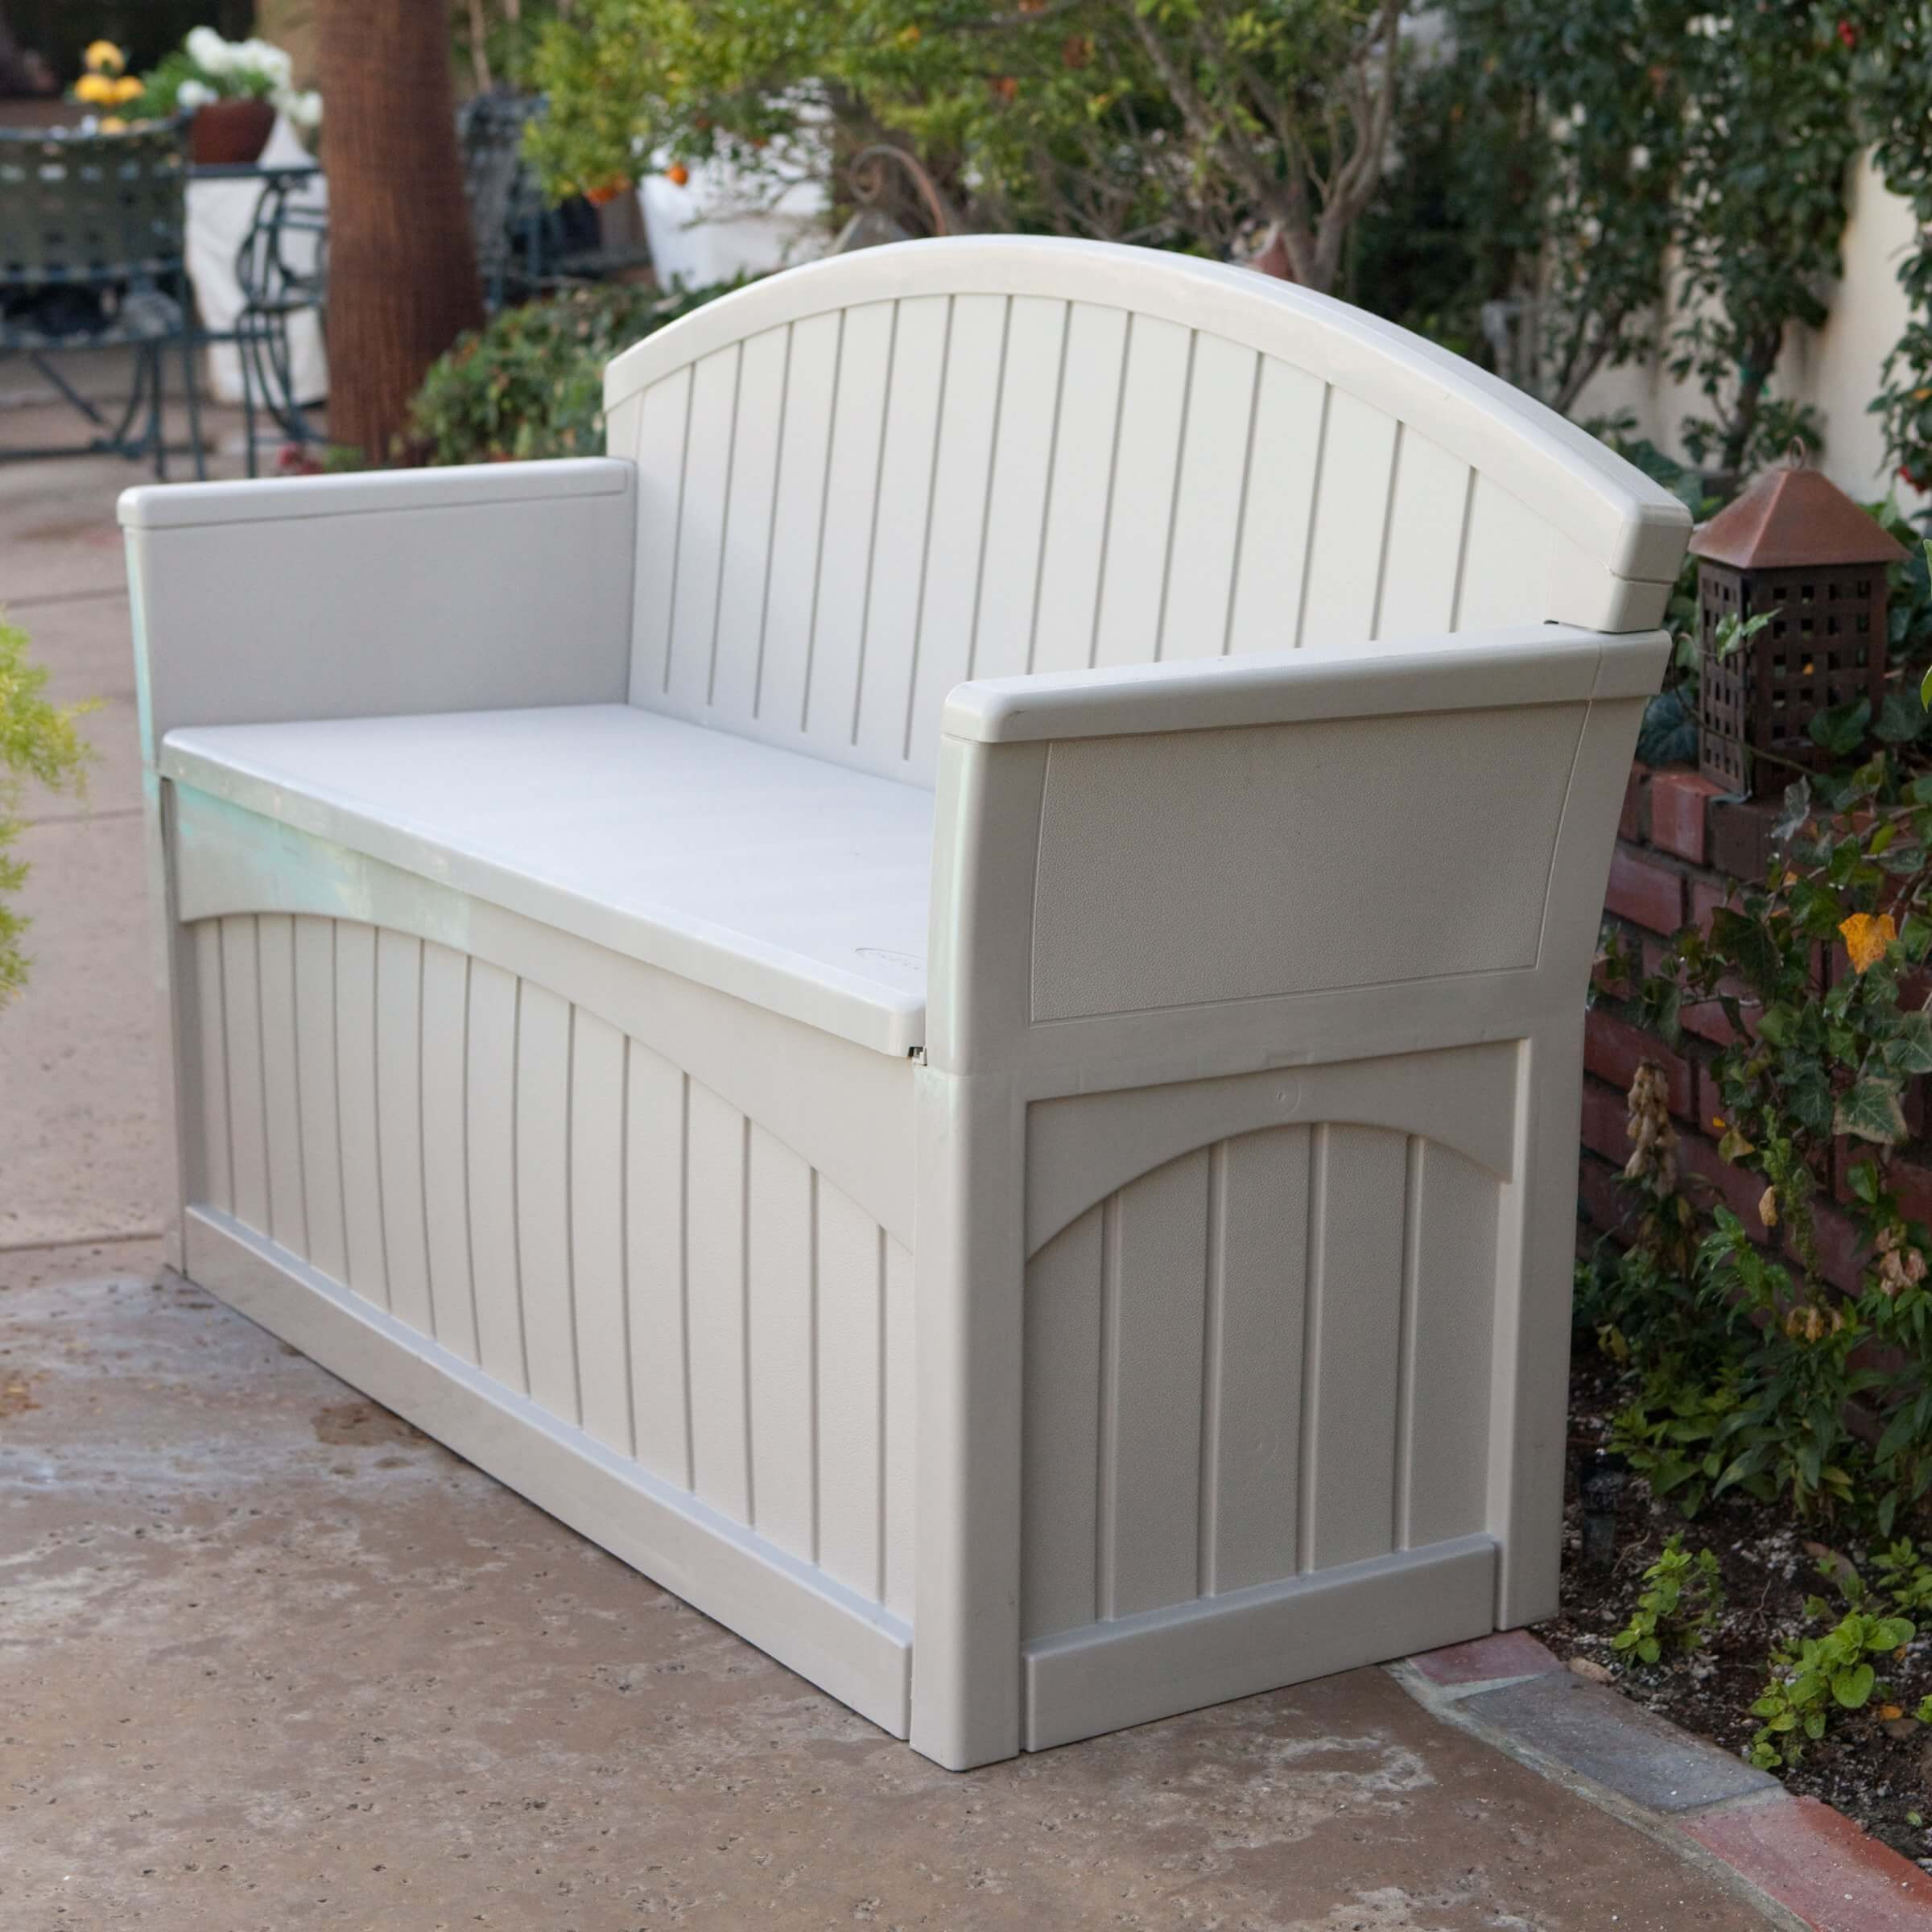 Storage Bench Outside
 Top 10 Types of Outdoor Deck Storage Boxes